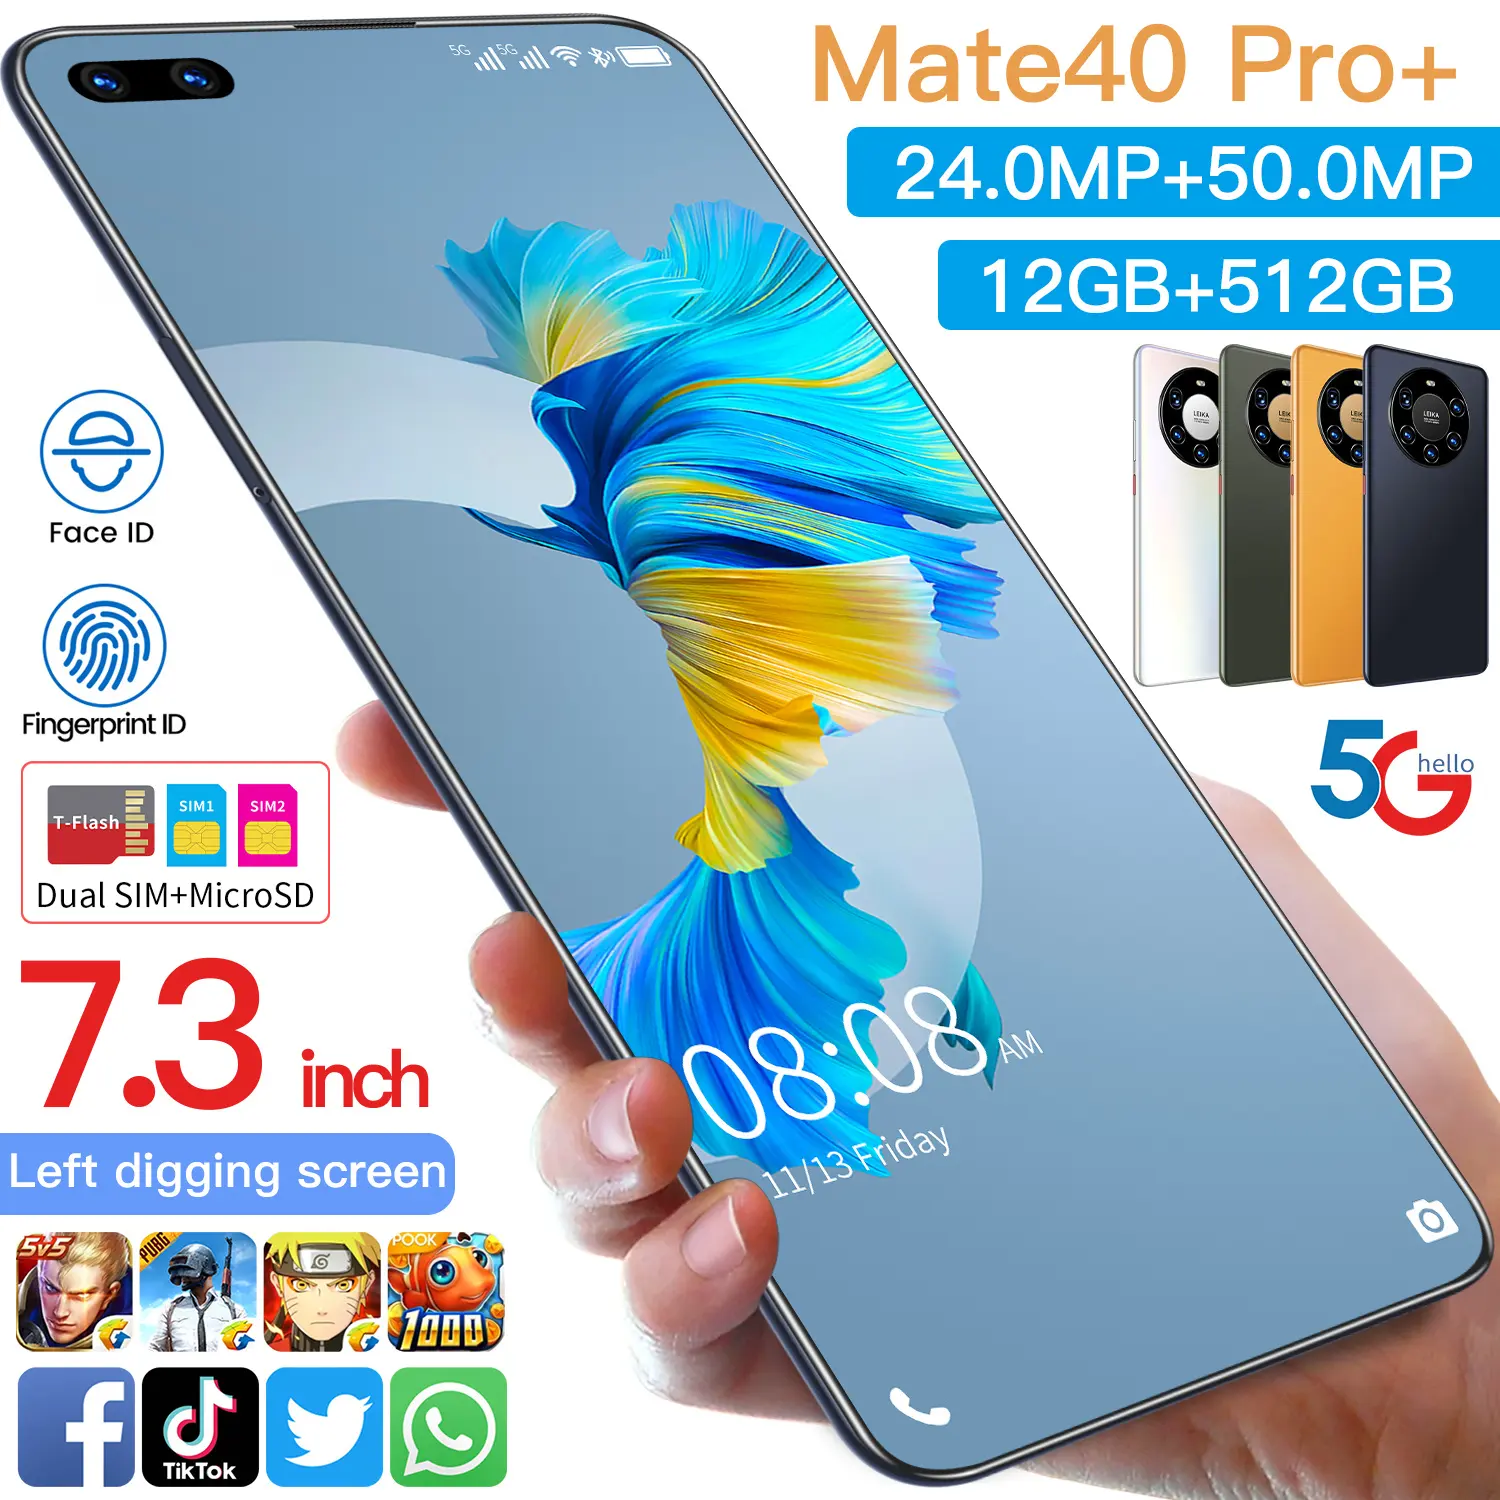 Hot Selling Mate 40 Pro Original 12GB 512GB 24MP 50MP Gesicht Entsperren Voll anzeige Android 10.0 Handy Smart Mobile Phone